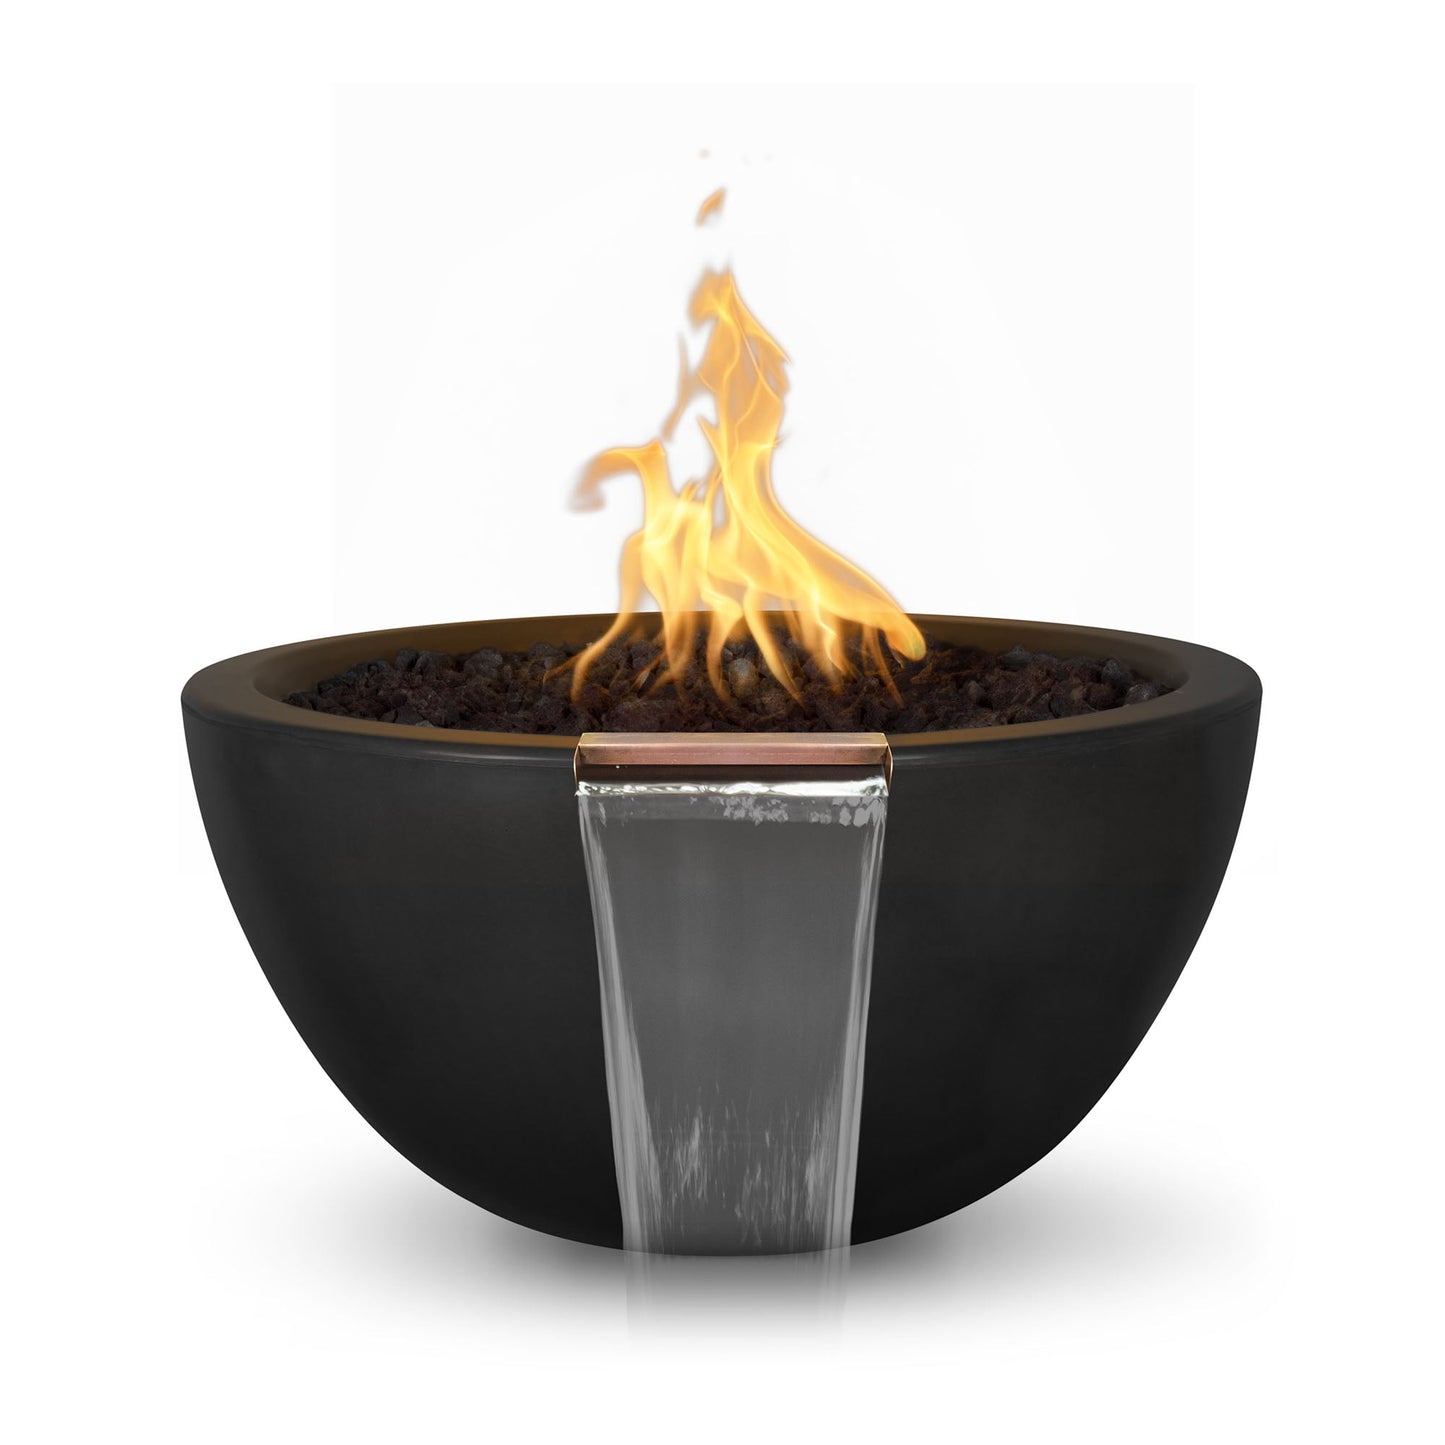 The Outdoor Plus Round Luna 38" Vanilla GFRC Concrete Liquid Propane Fire & Water Bowl with Match Lit with Flame Sense Ignition